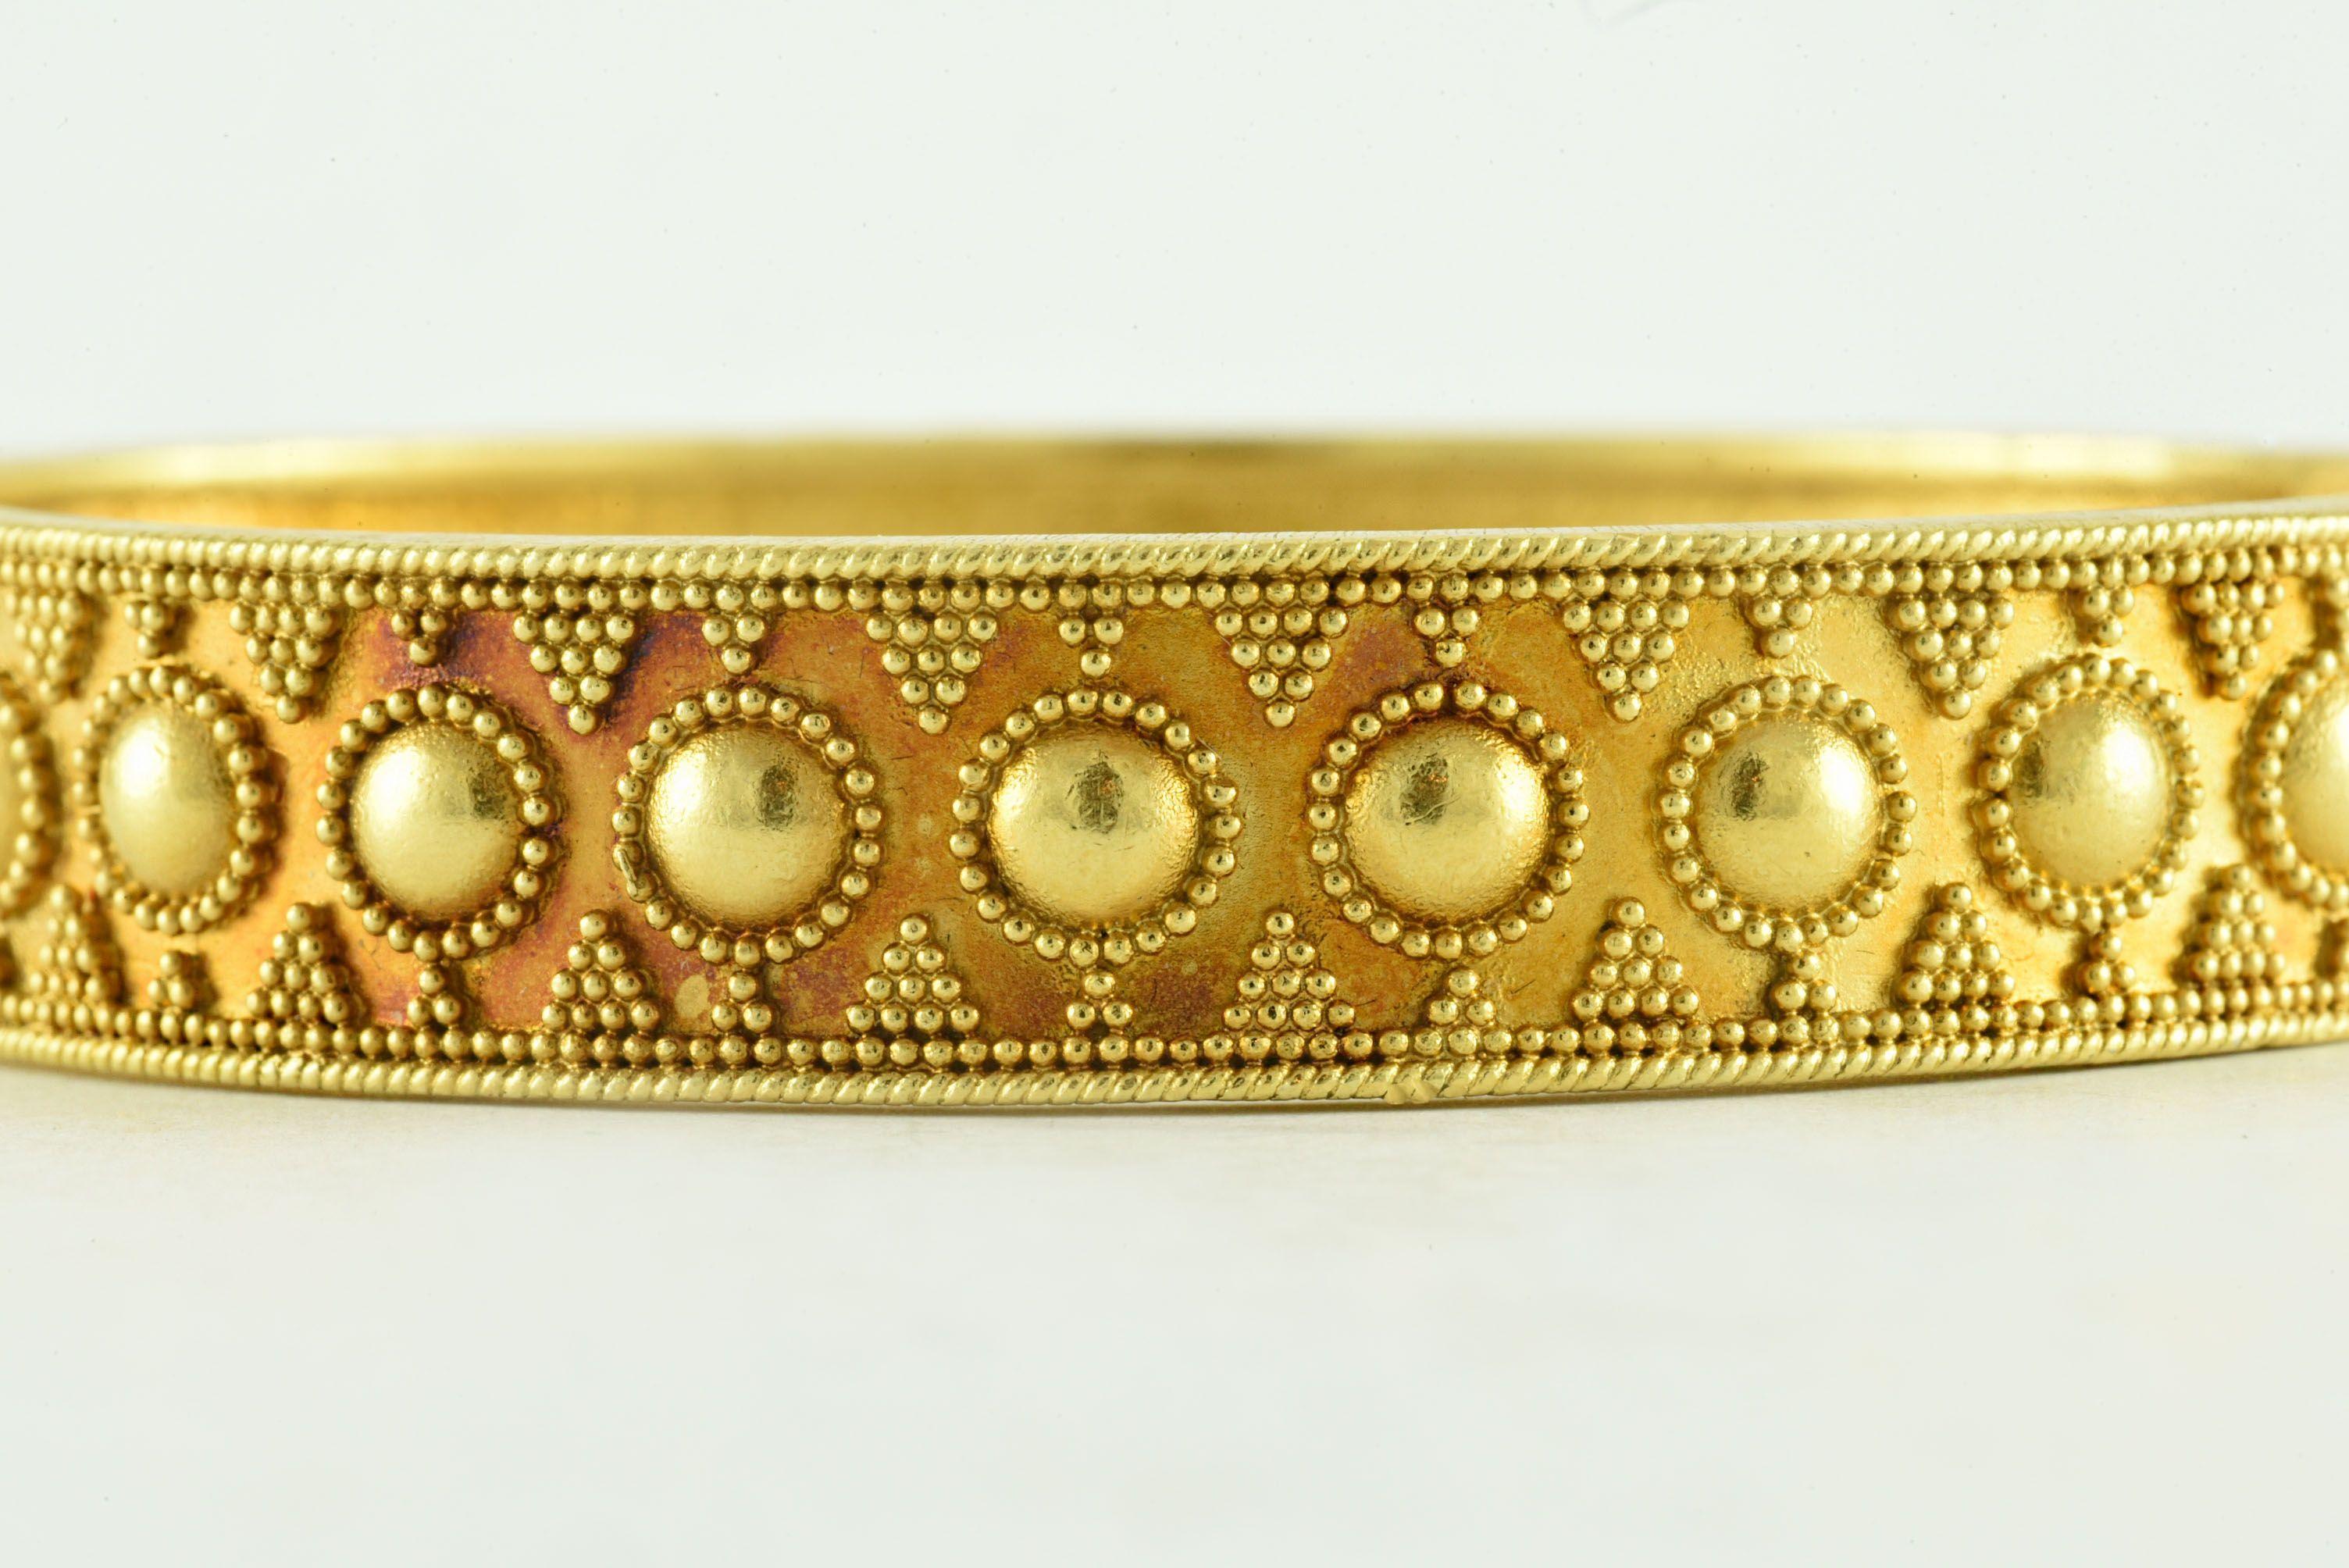 This 18kt yellow gold bangle bracelet was designed by the celebrated Greek jeweler, Ilias Lalaounis.  
